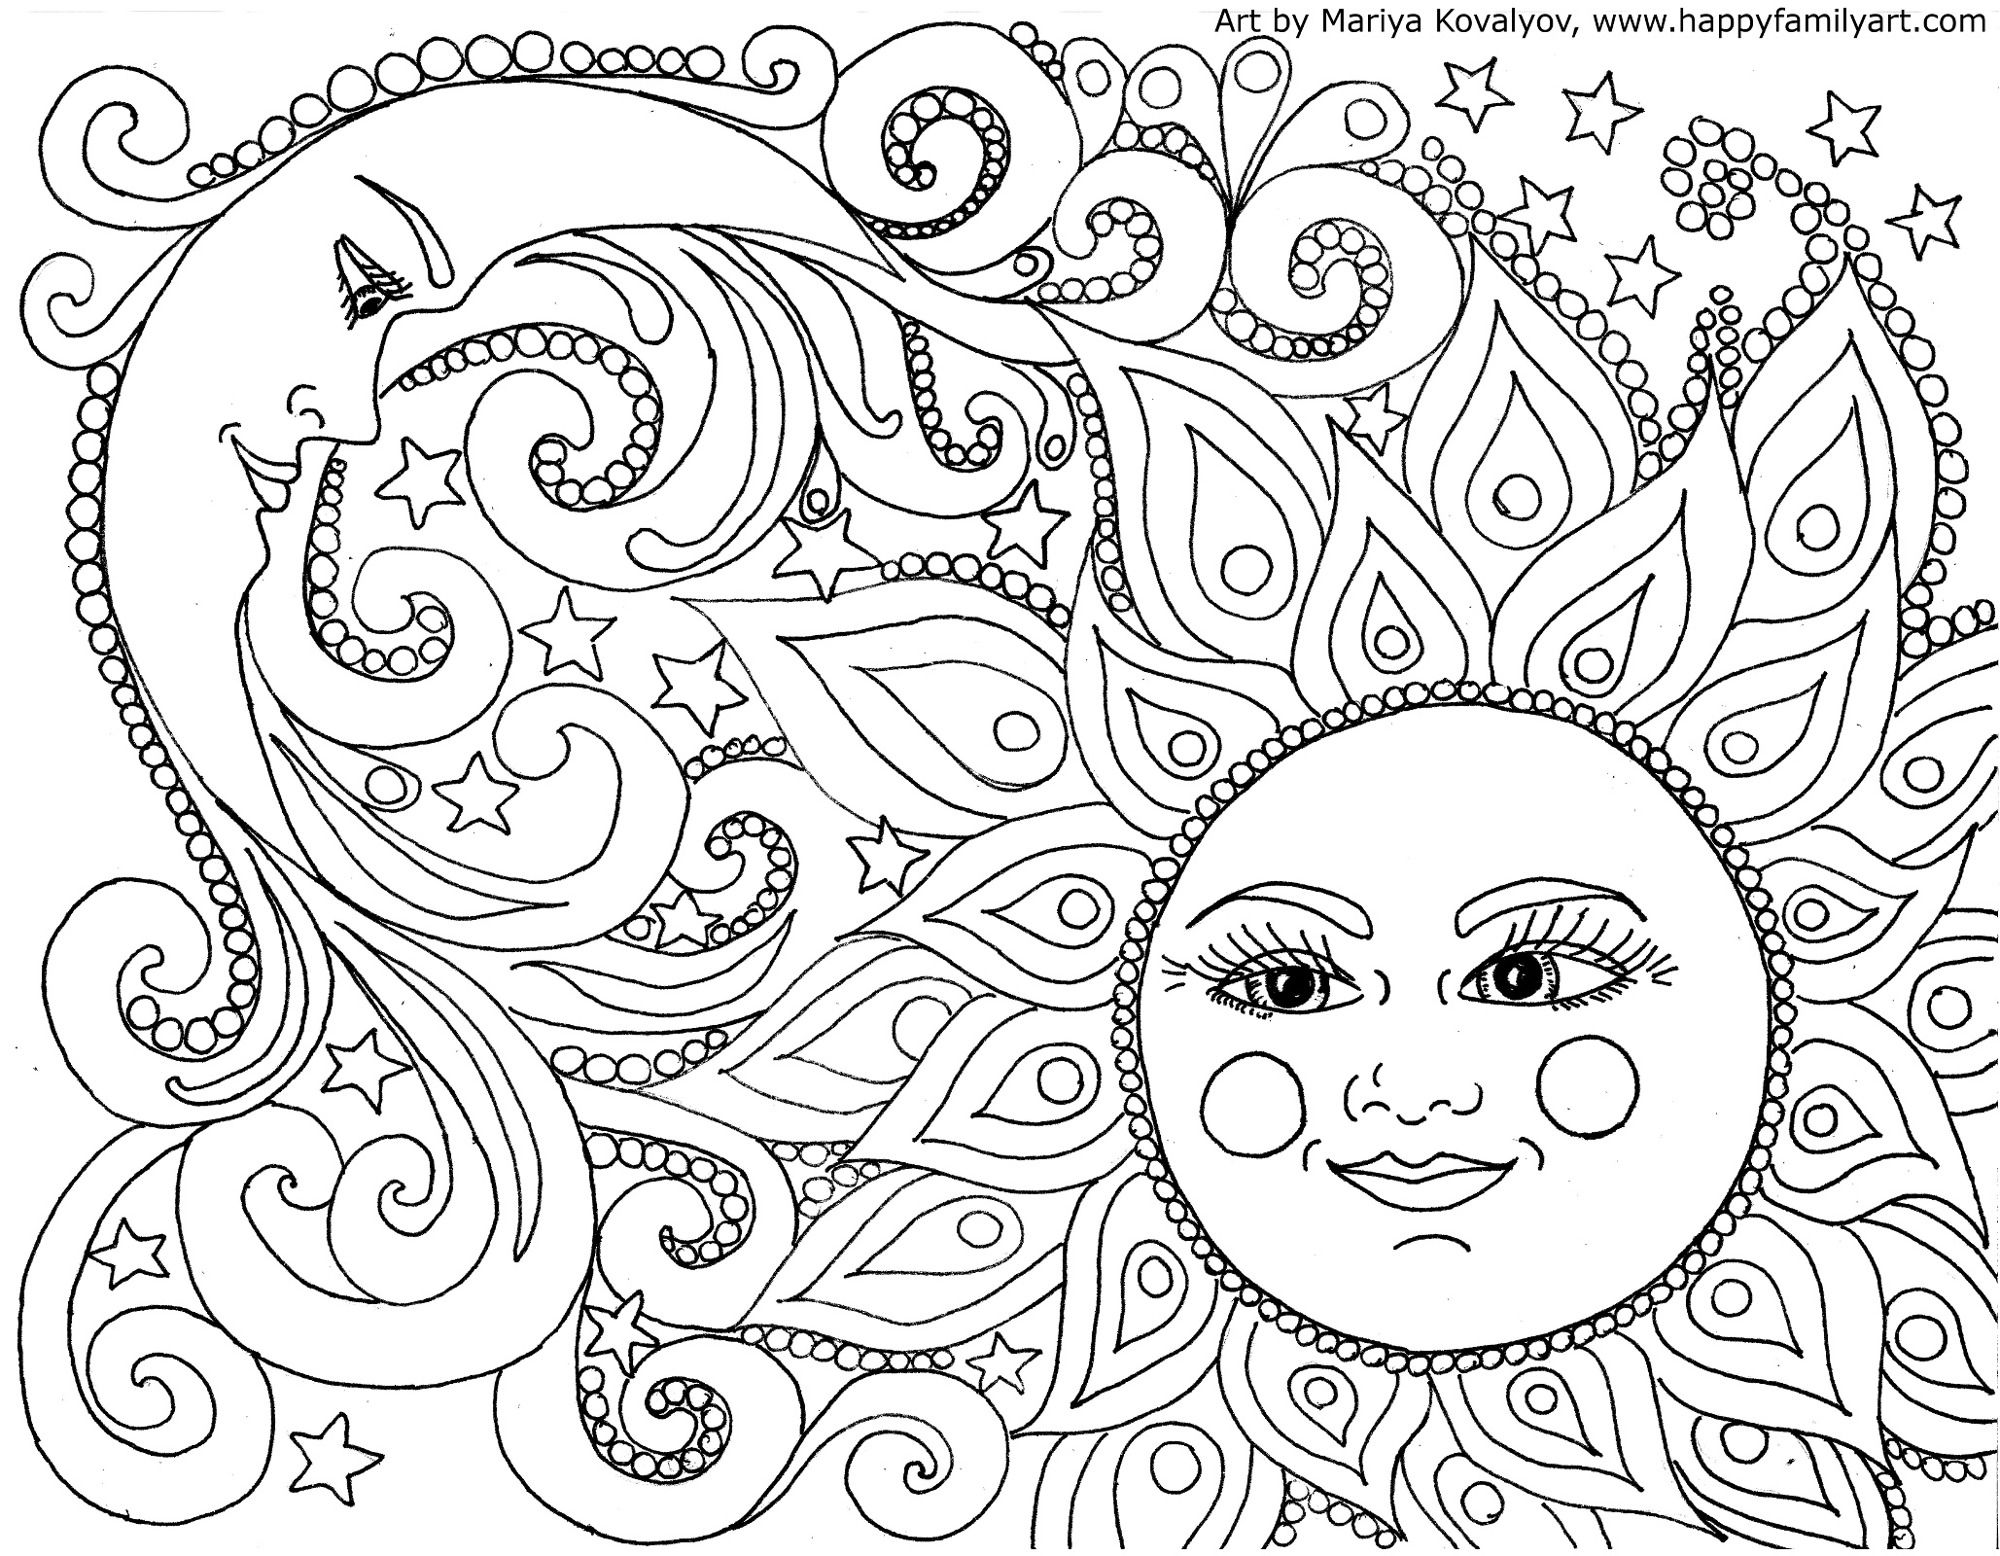 1000+ ideas about Adult Coloring Pages on Pinterest | Coloring ...